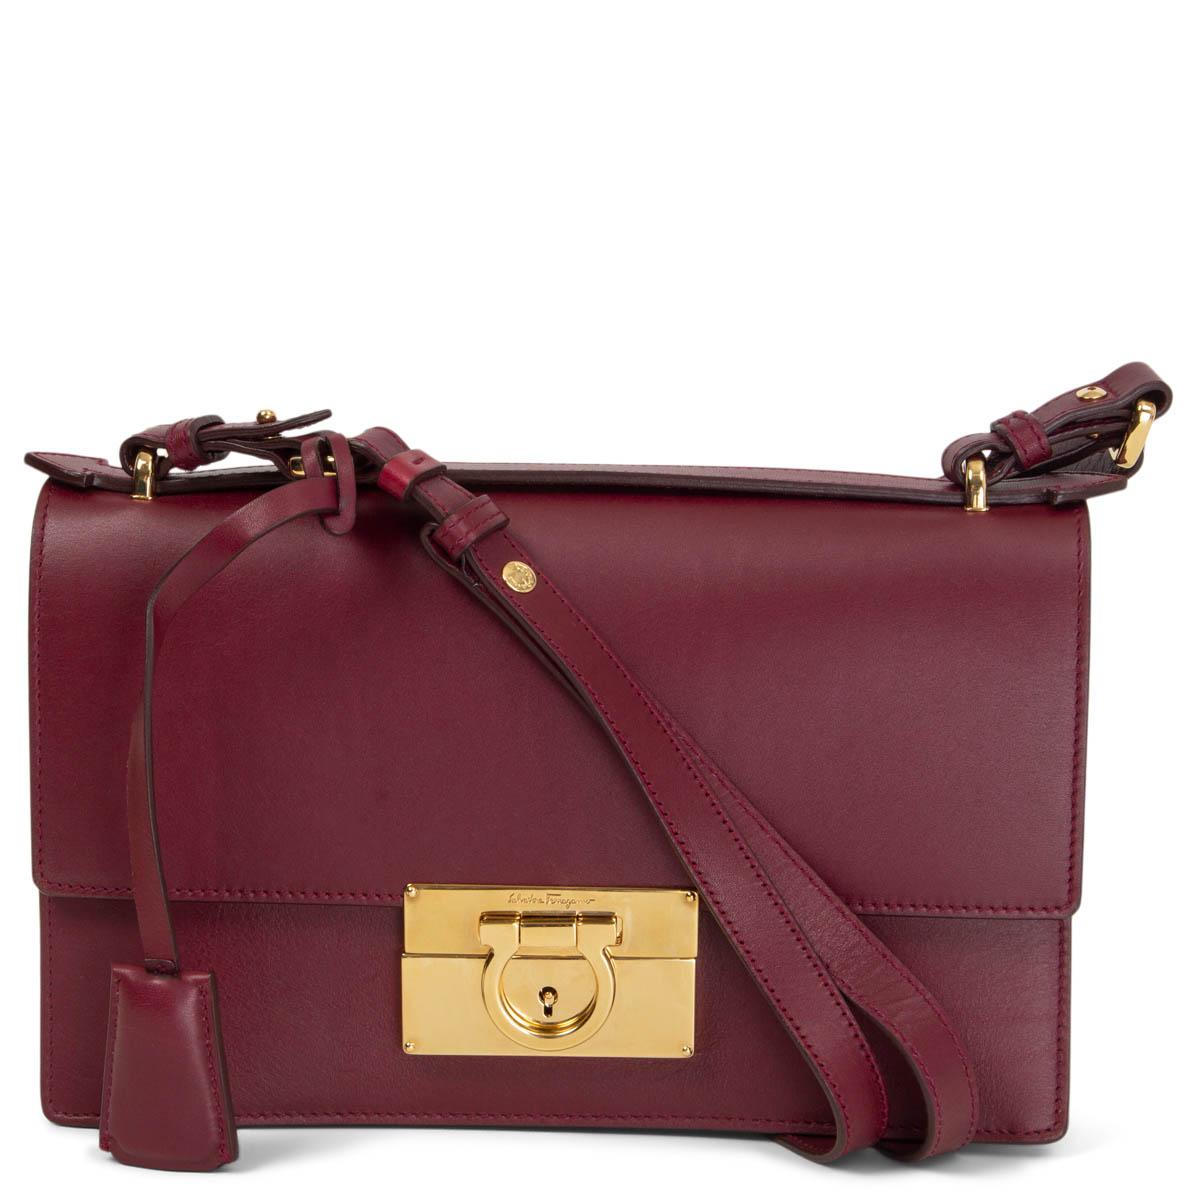 100% authentic Salvatore Ferragamo Aileen Gancio Shoulder Bag in burgundy calfskin featuring the gold-tone signature Gancio lock closure. Lined in red leather with one zipper pocket against the back and one flat pocket. Shoulder strap can get